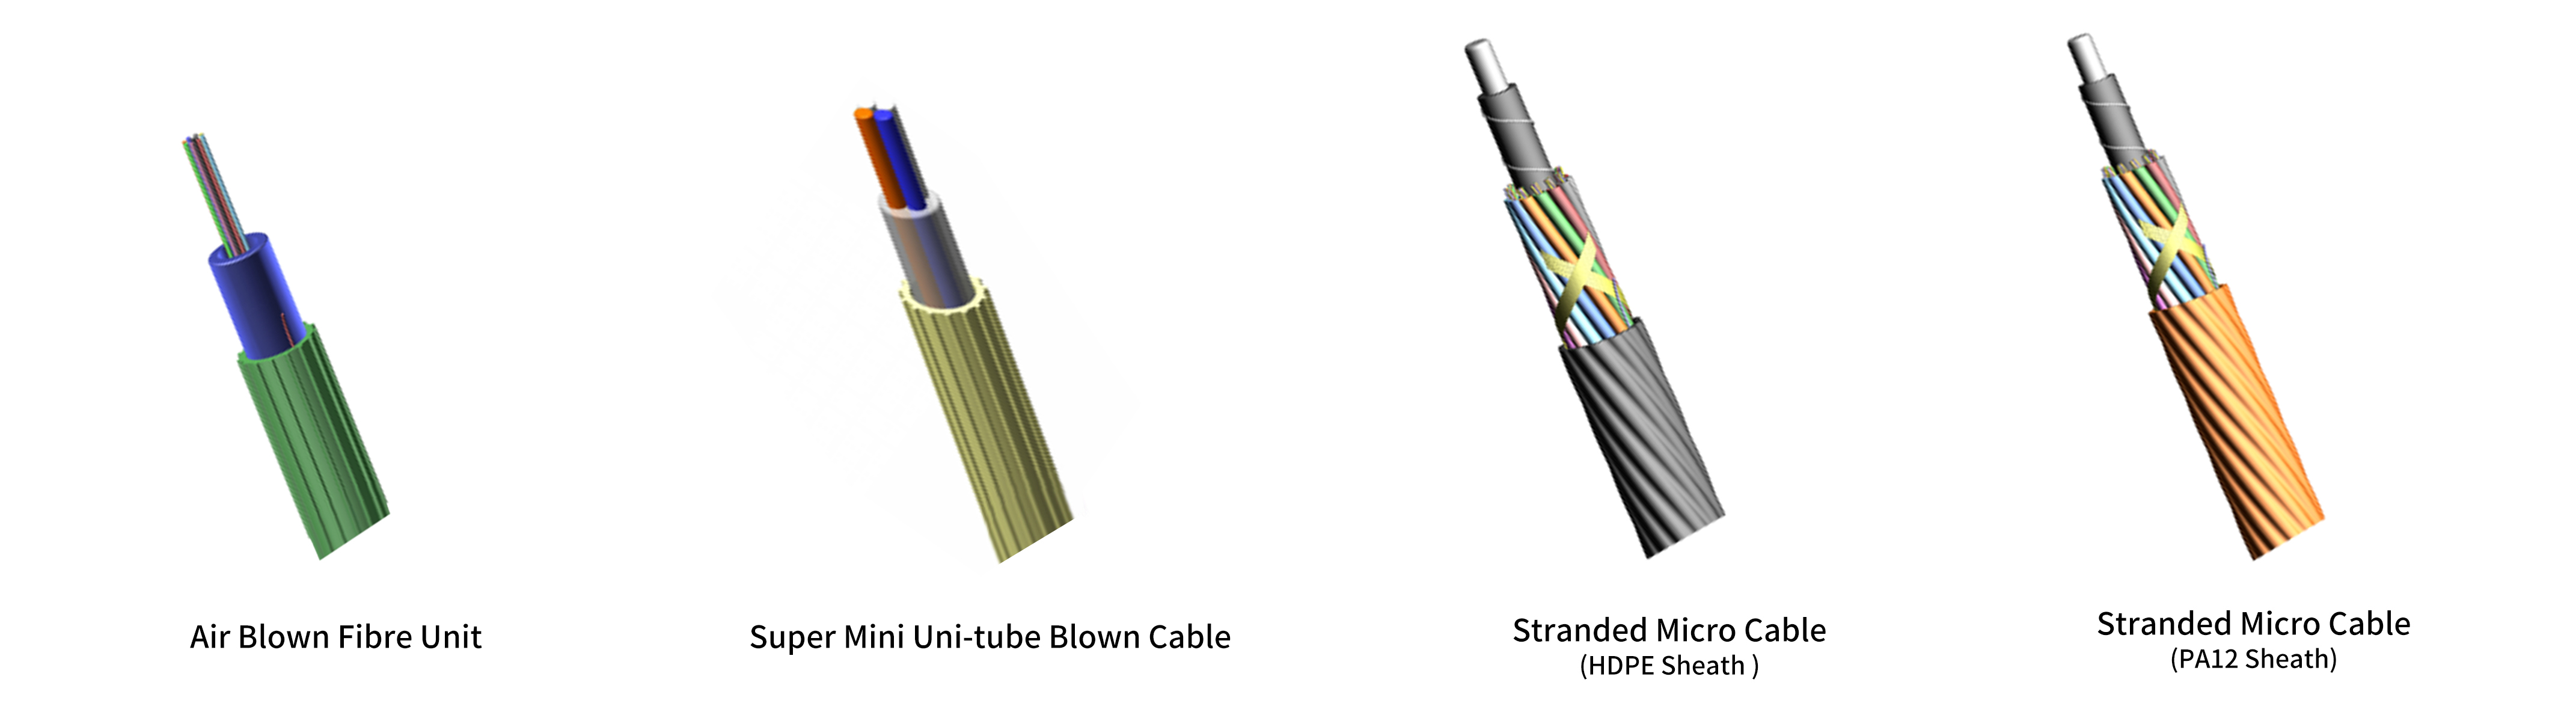 6 Tips To Blow Micro-cable Far Away (4)